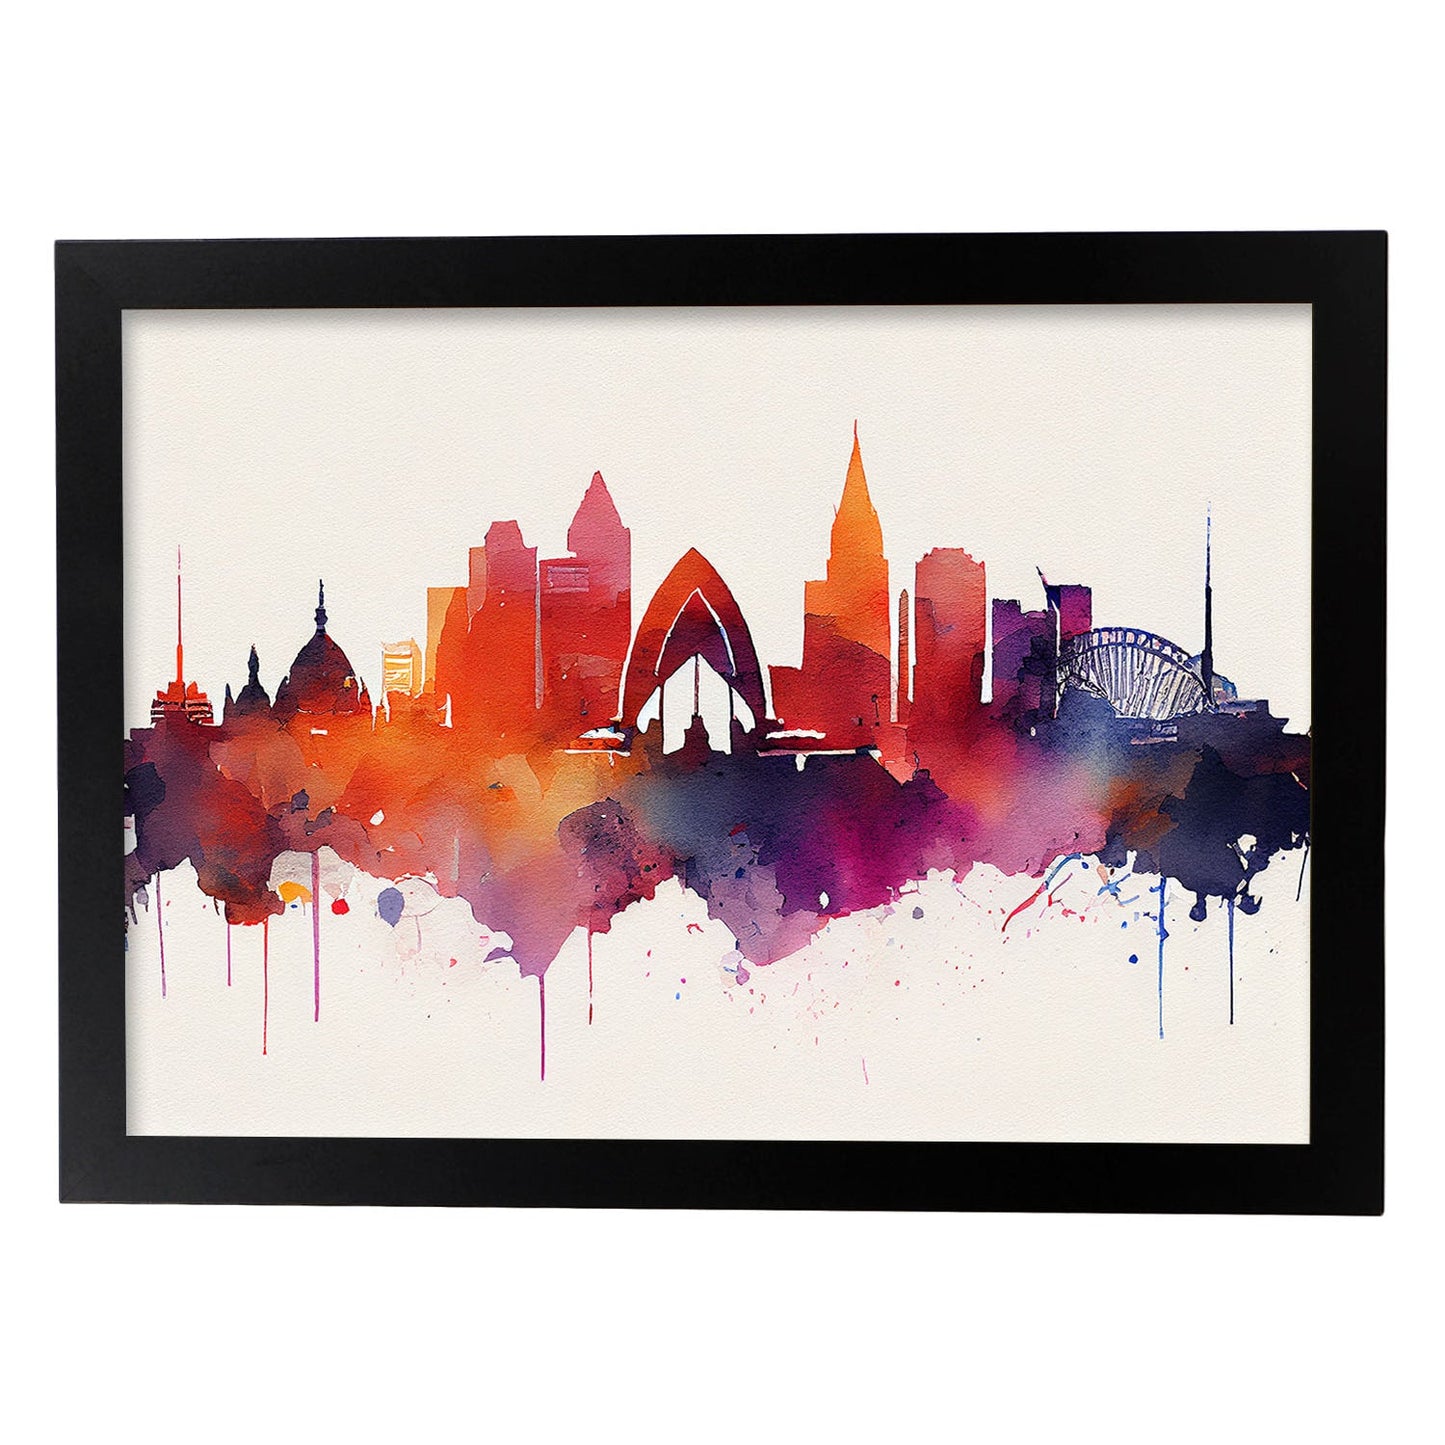 Nacnic watercolor of a skyline of the city of Sydney_2. Aesthetic Wall Art Prints for Bedroom or Living Room Design.